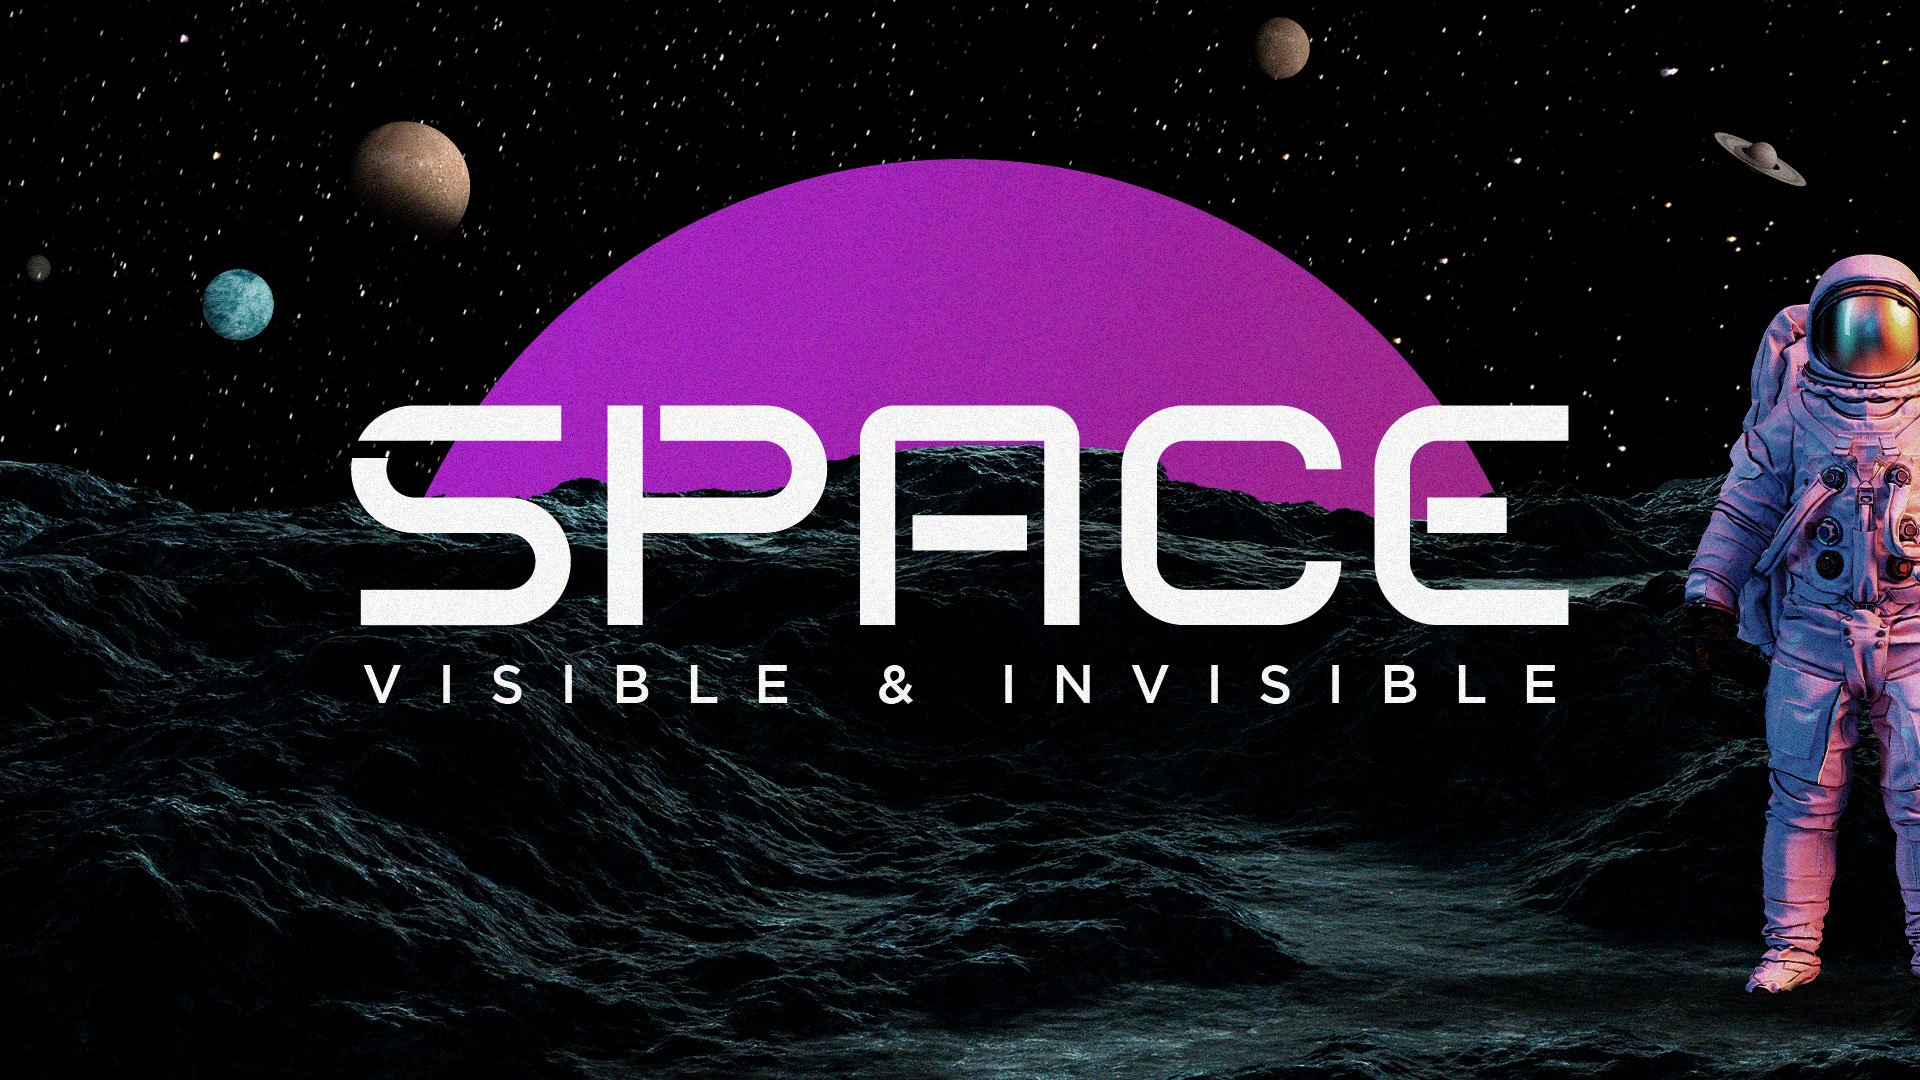    Space: Visible & Invisible